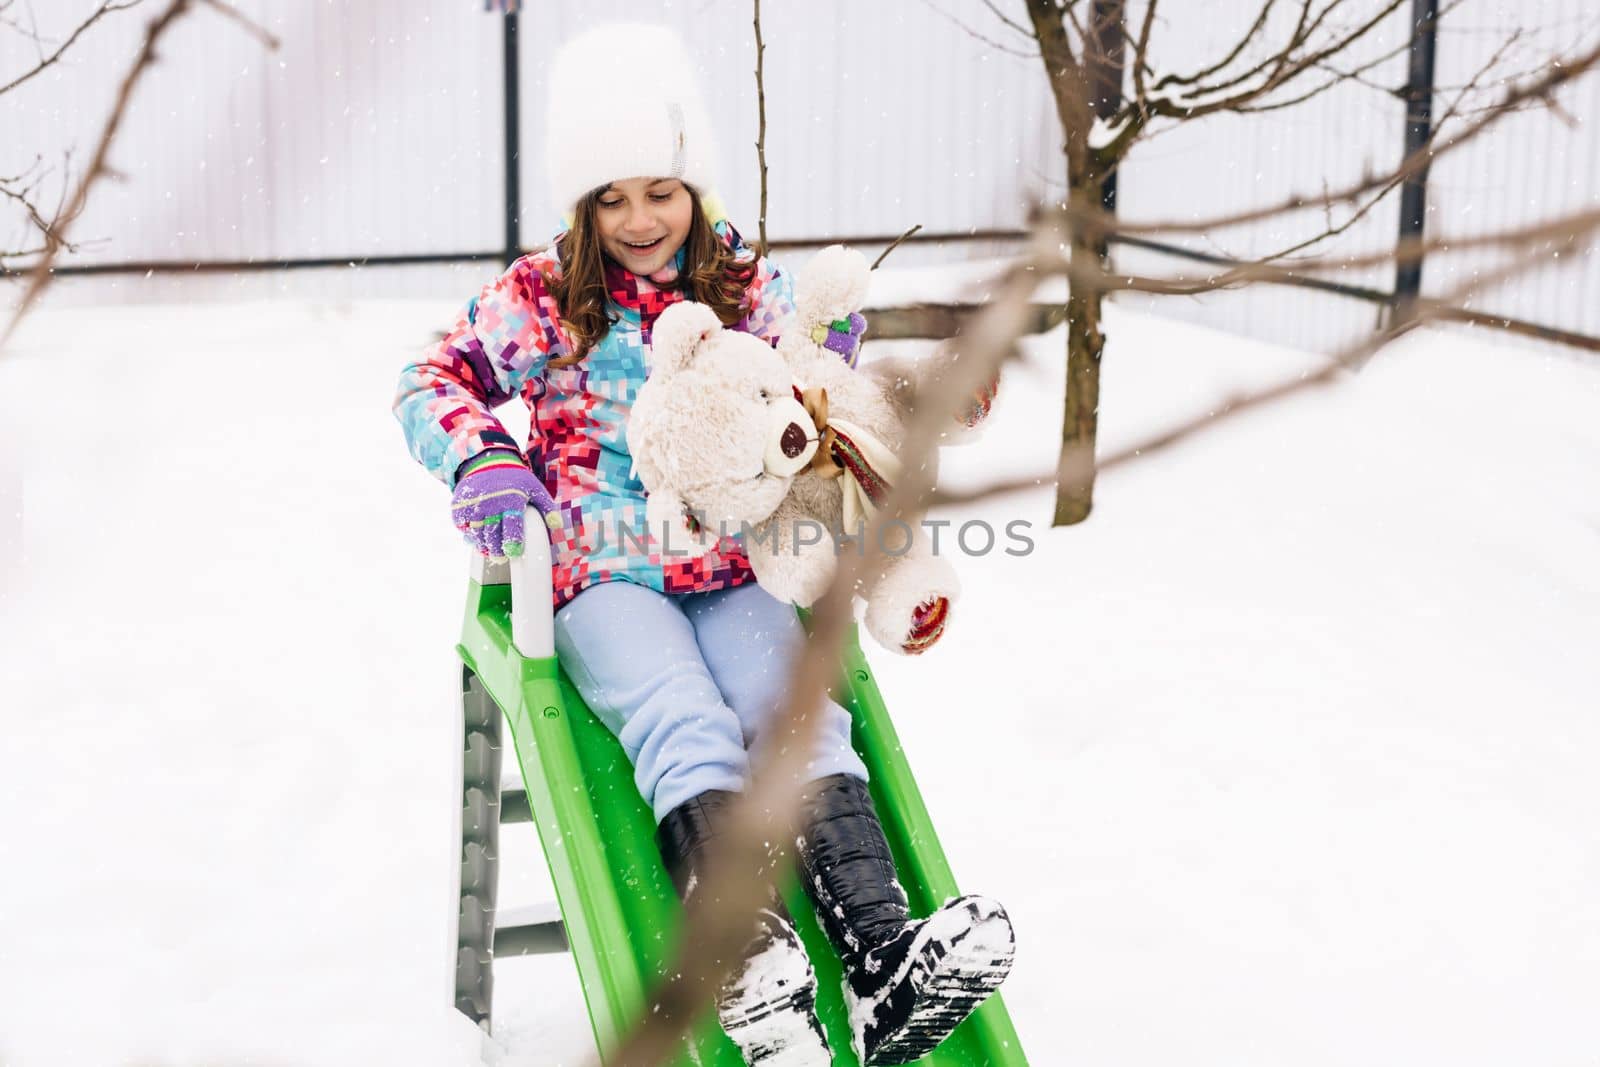 Child with toy teddy bear sits on a sled. Winter vacantion. Christmas celebration and winter holidays. Winter fun and outdoor activities with kids.